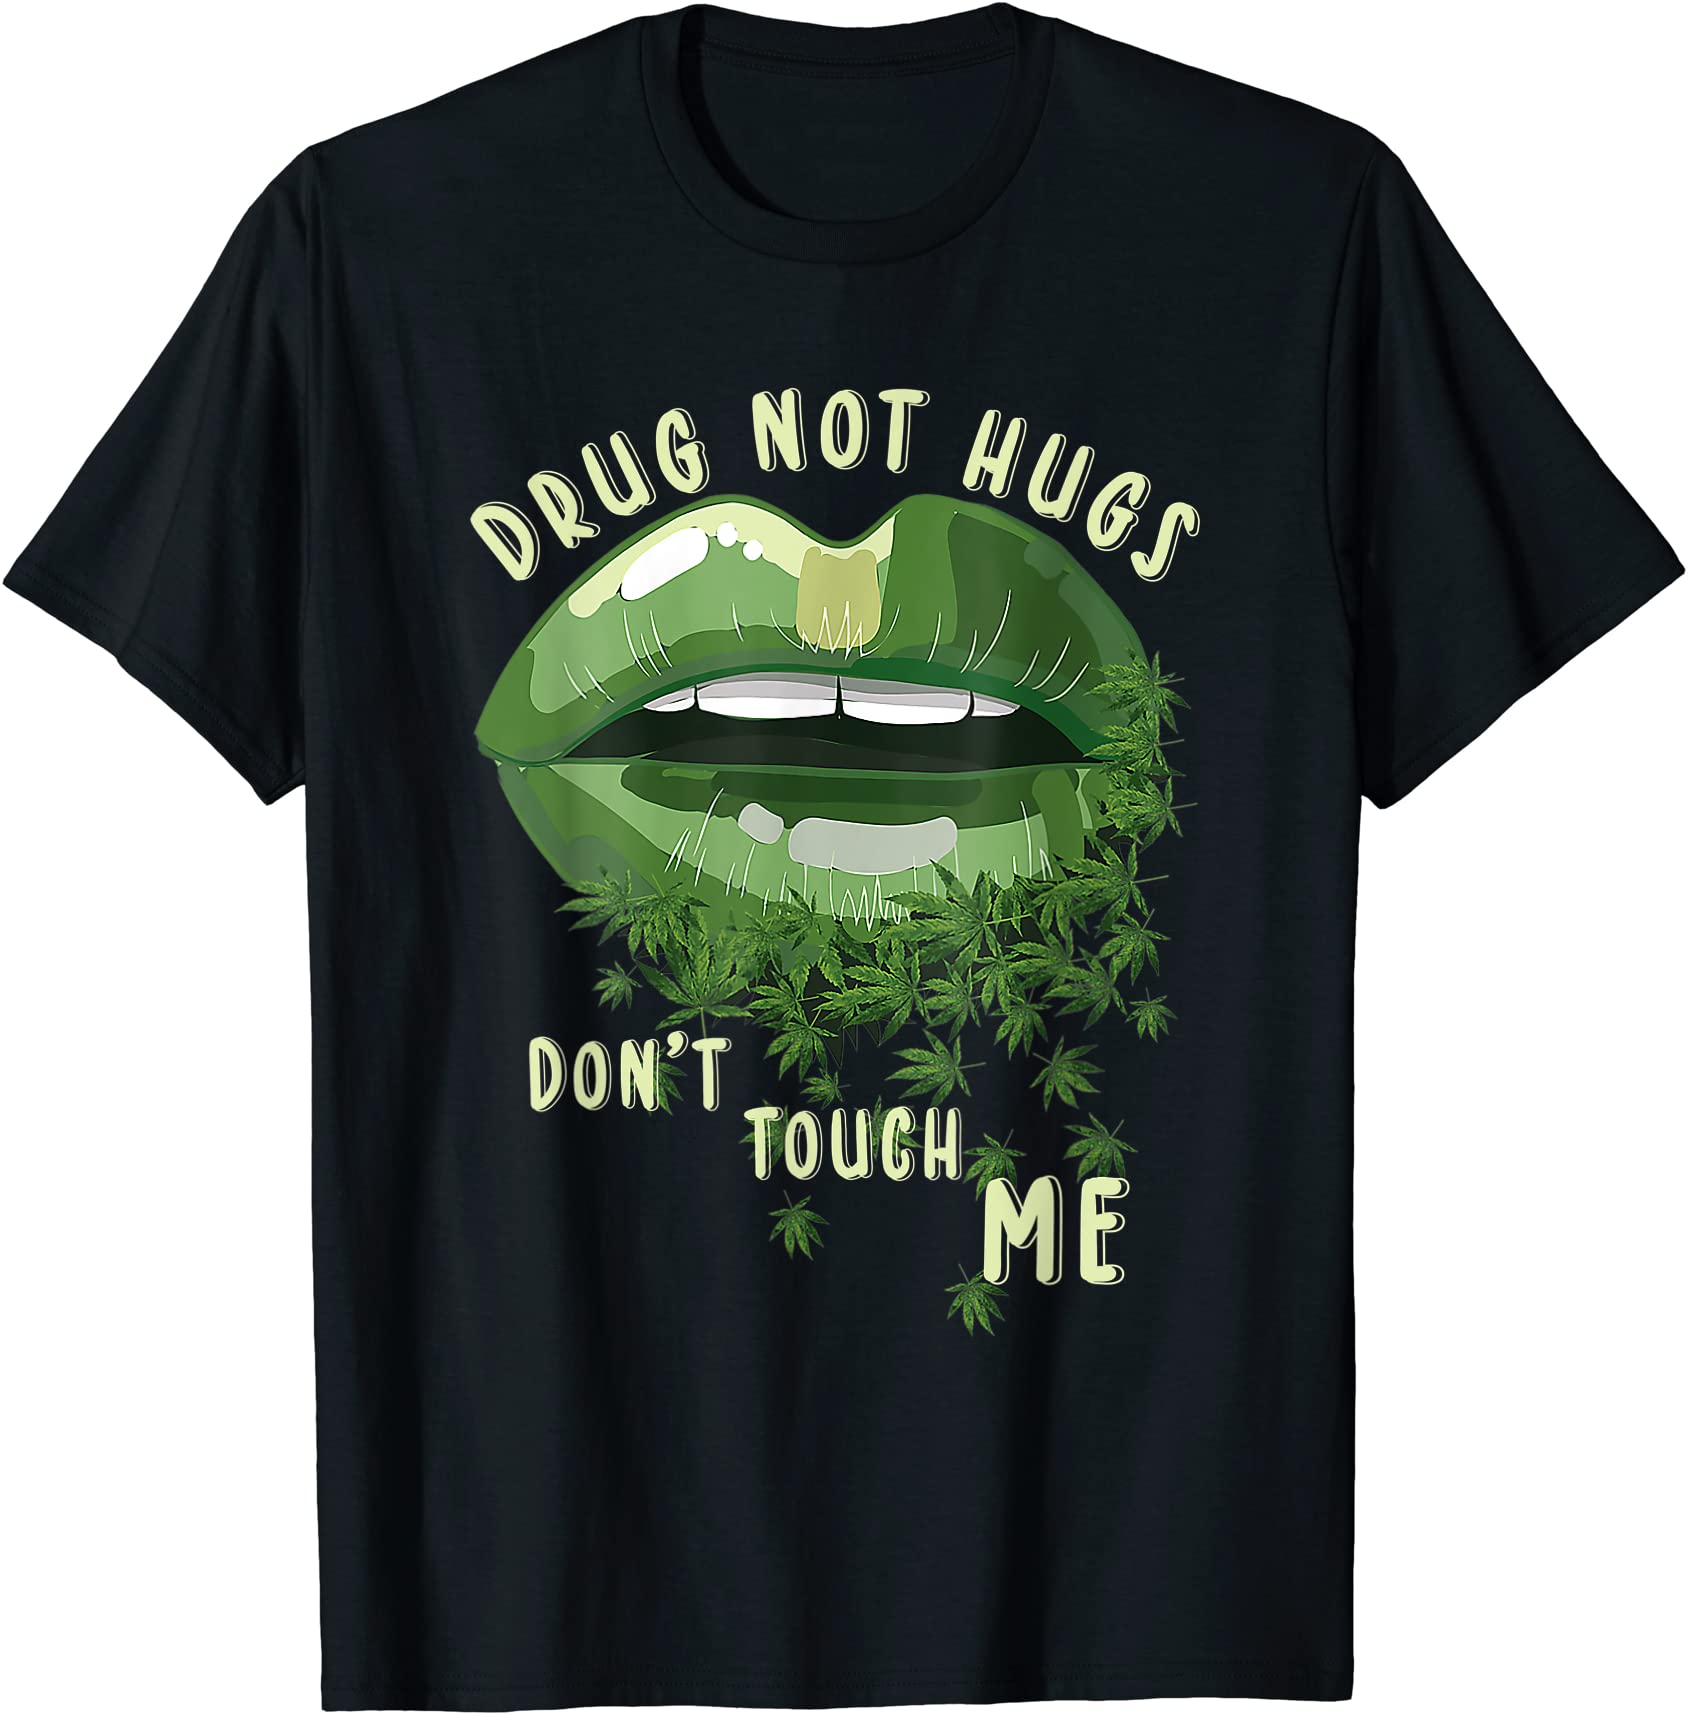 Sexy Lips Weed Canabis 420 Funny Drug Not Hugs Dont Touch Me T Shirt Men Buy T Shirt Designs